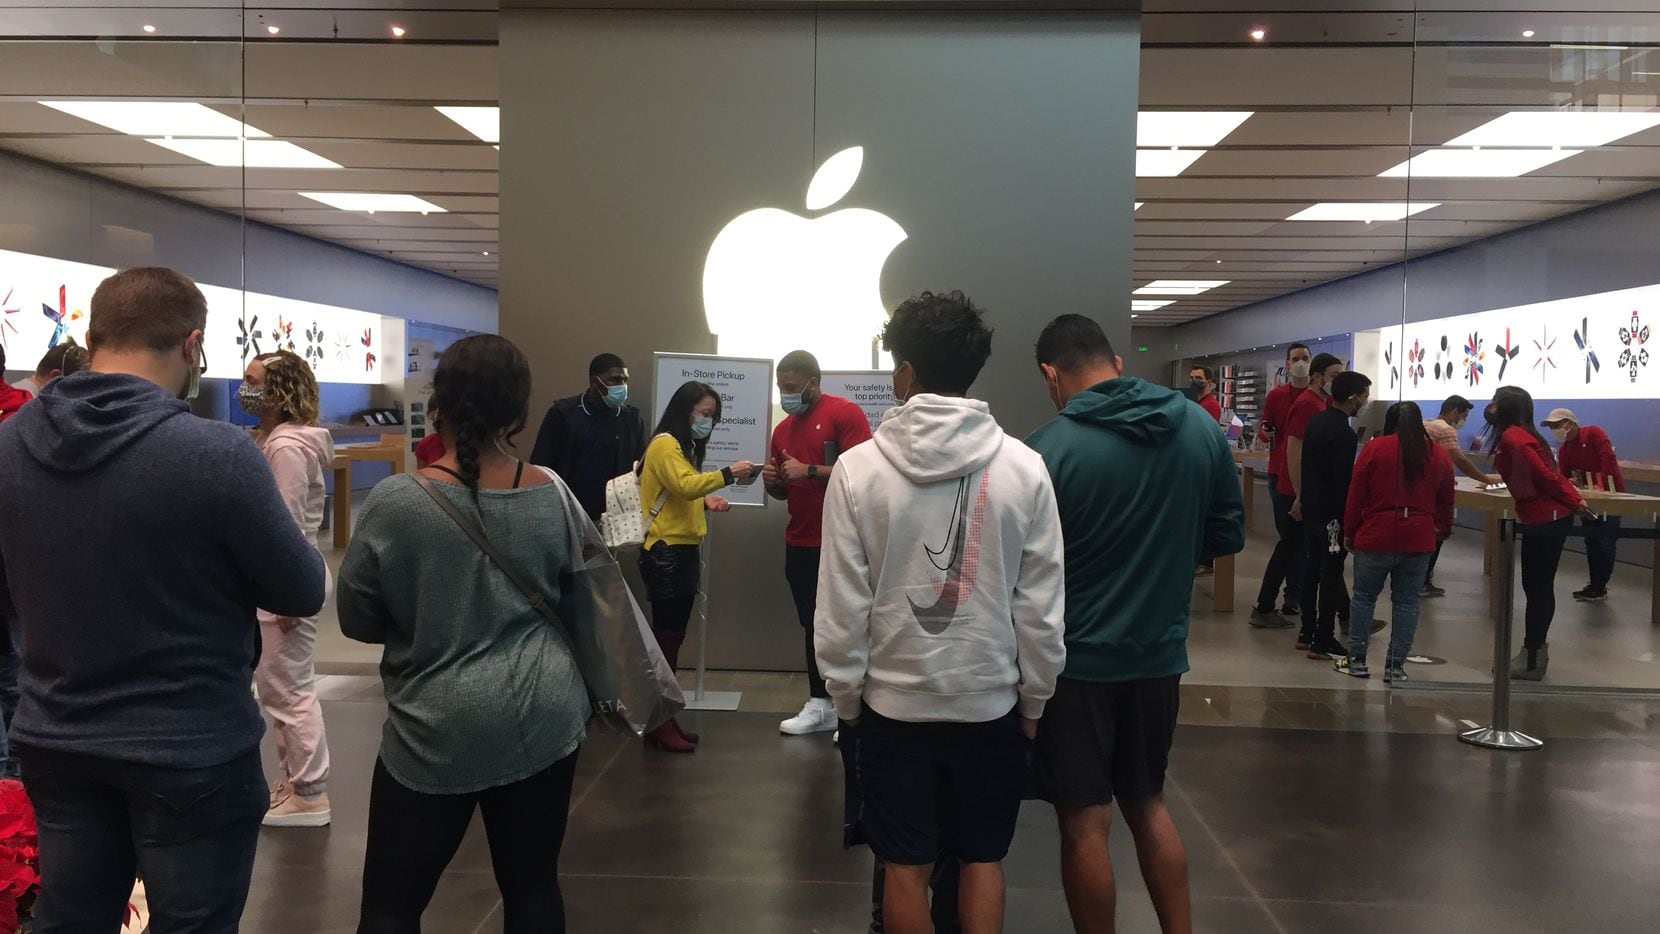 Shoppers wait in line to get into the NorthPark Center Apple store in Dallas on Black Friday.